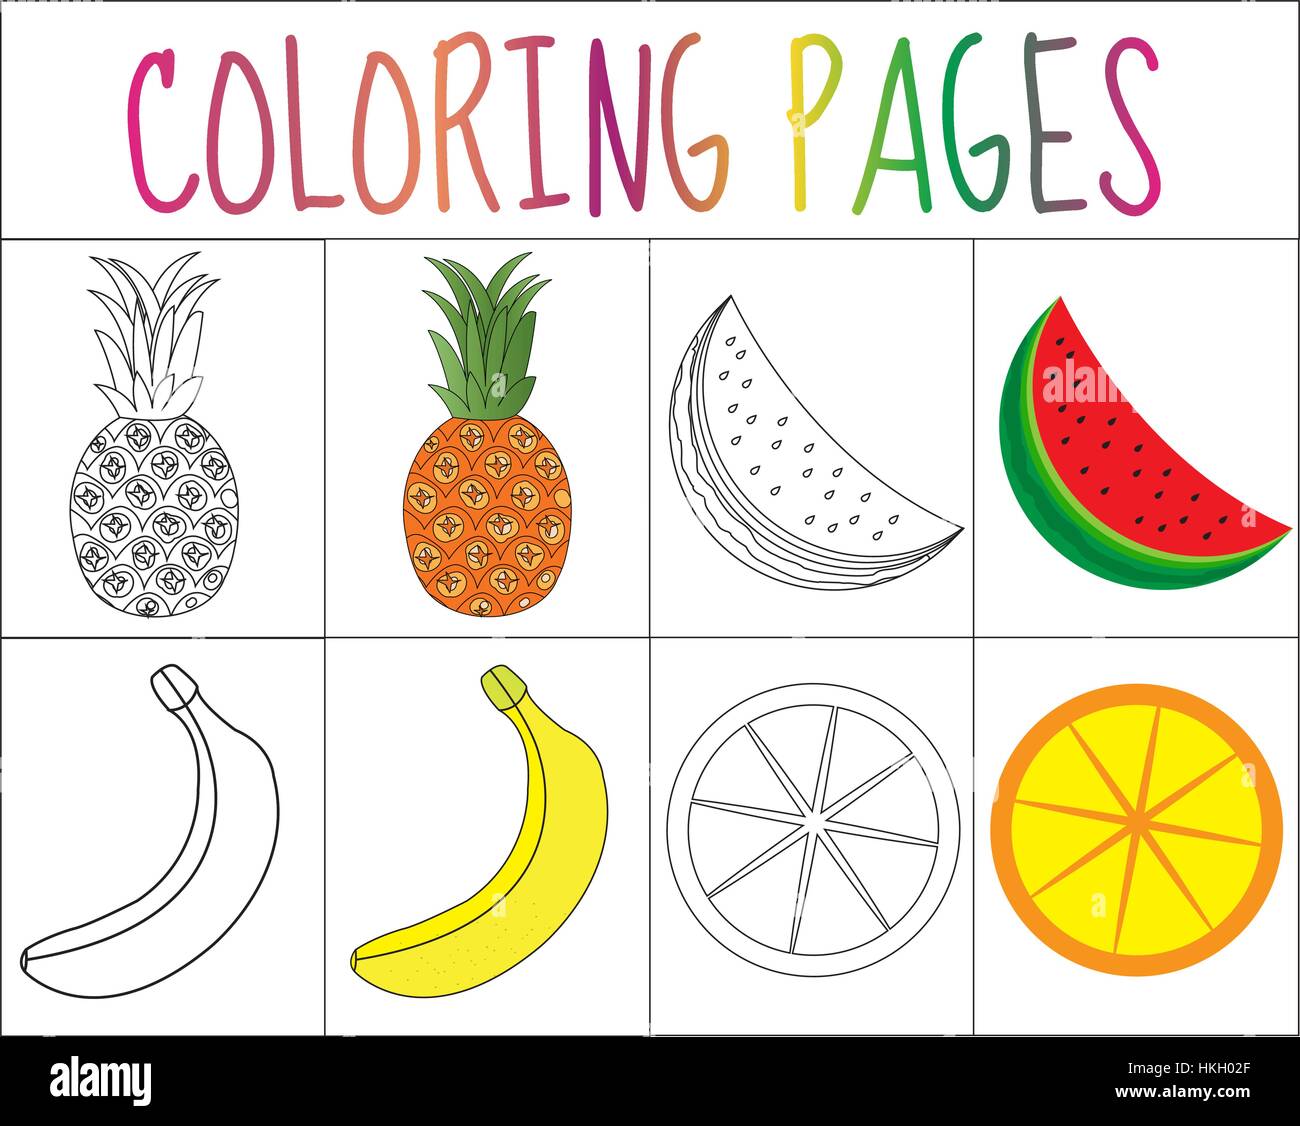 15 Fruit Coloring Pages for Your Kids of All Ages Will Love!